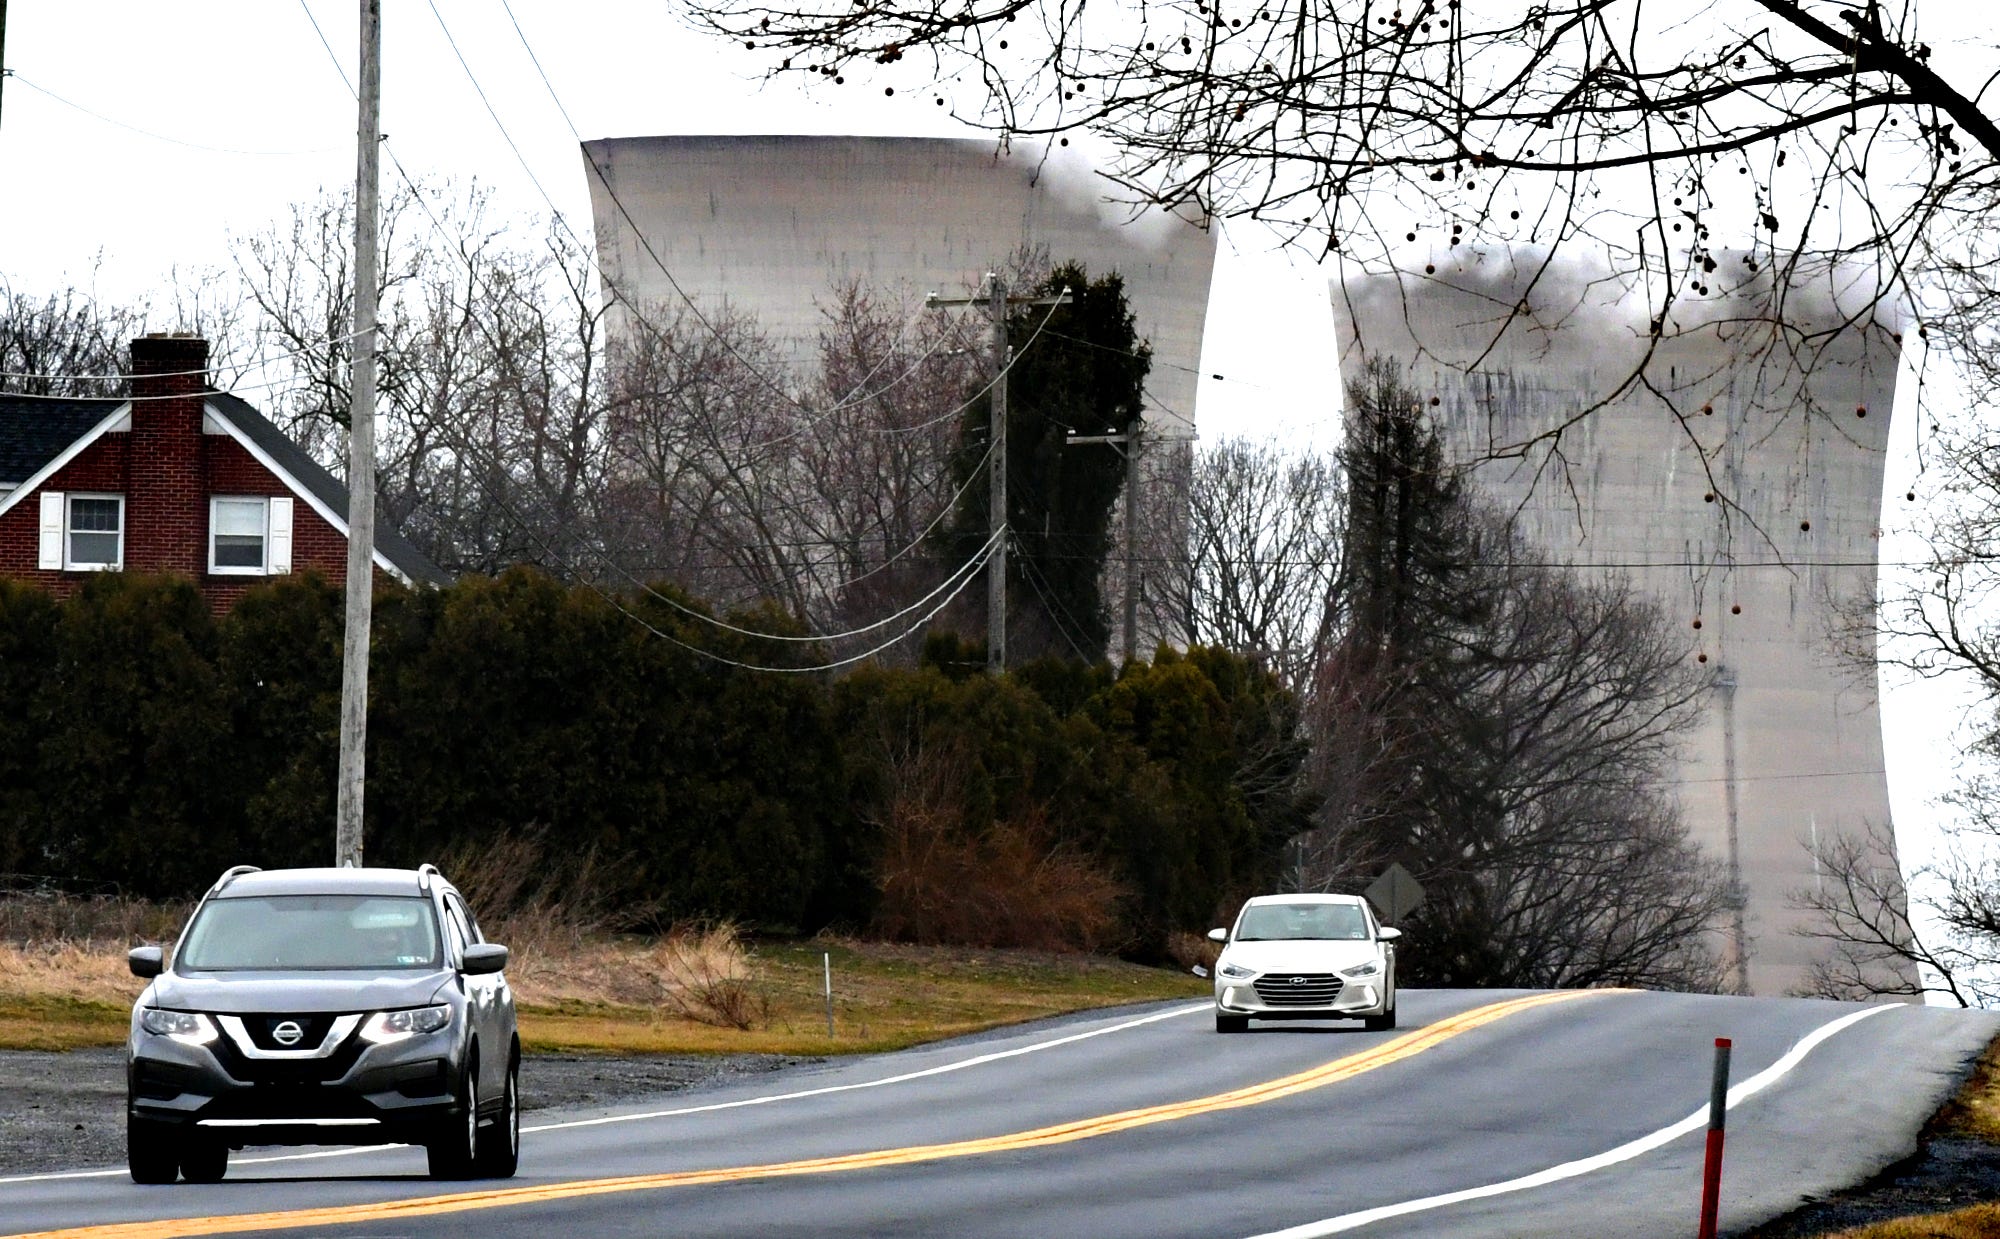 Traffic travels south on Route 441 near the Three Mile Island Nuclear Generating Station in Londonderry Township, Dauphin County, Friday, March 15, 2019. The plant's Unit 2 reactors have been shut down since the March 28,1979, partial meltdown. Bill Kalina photo